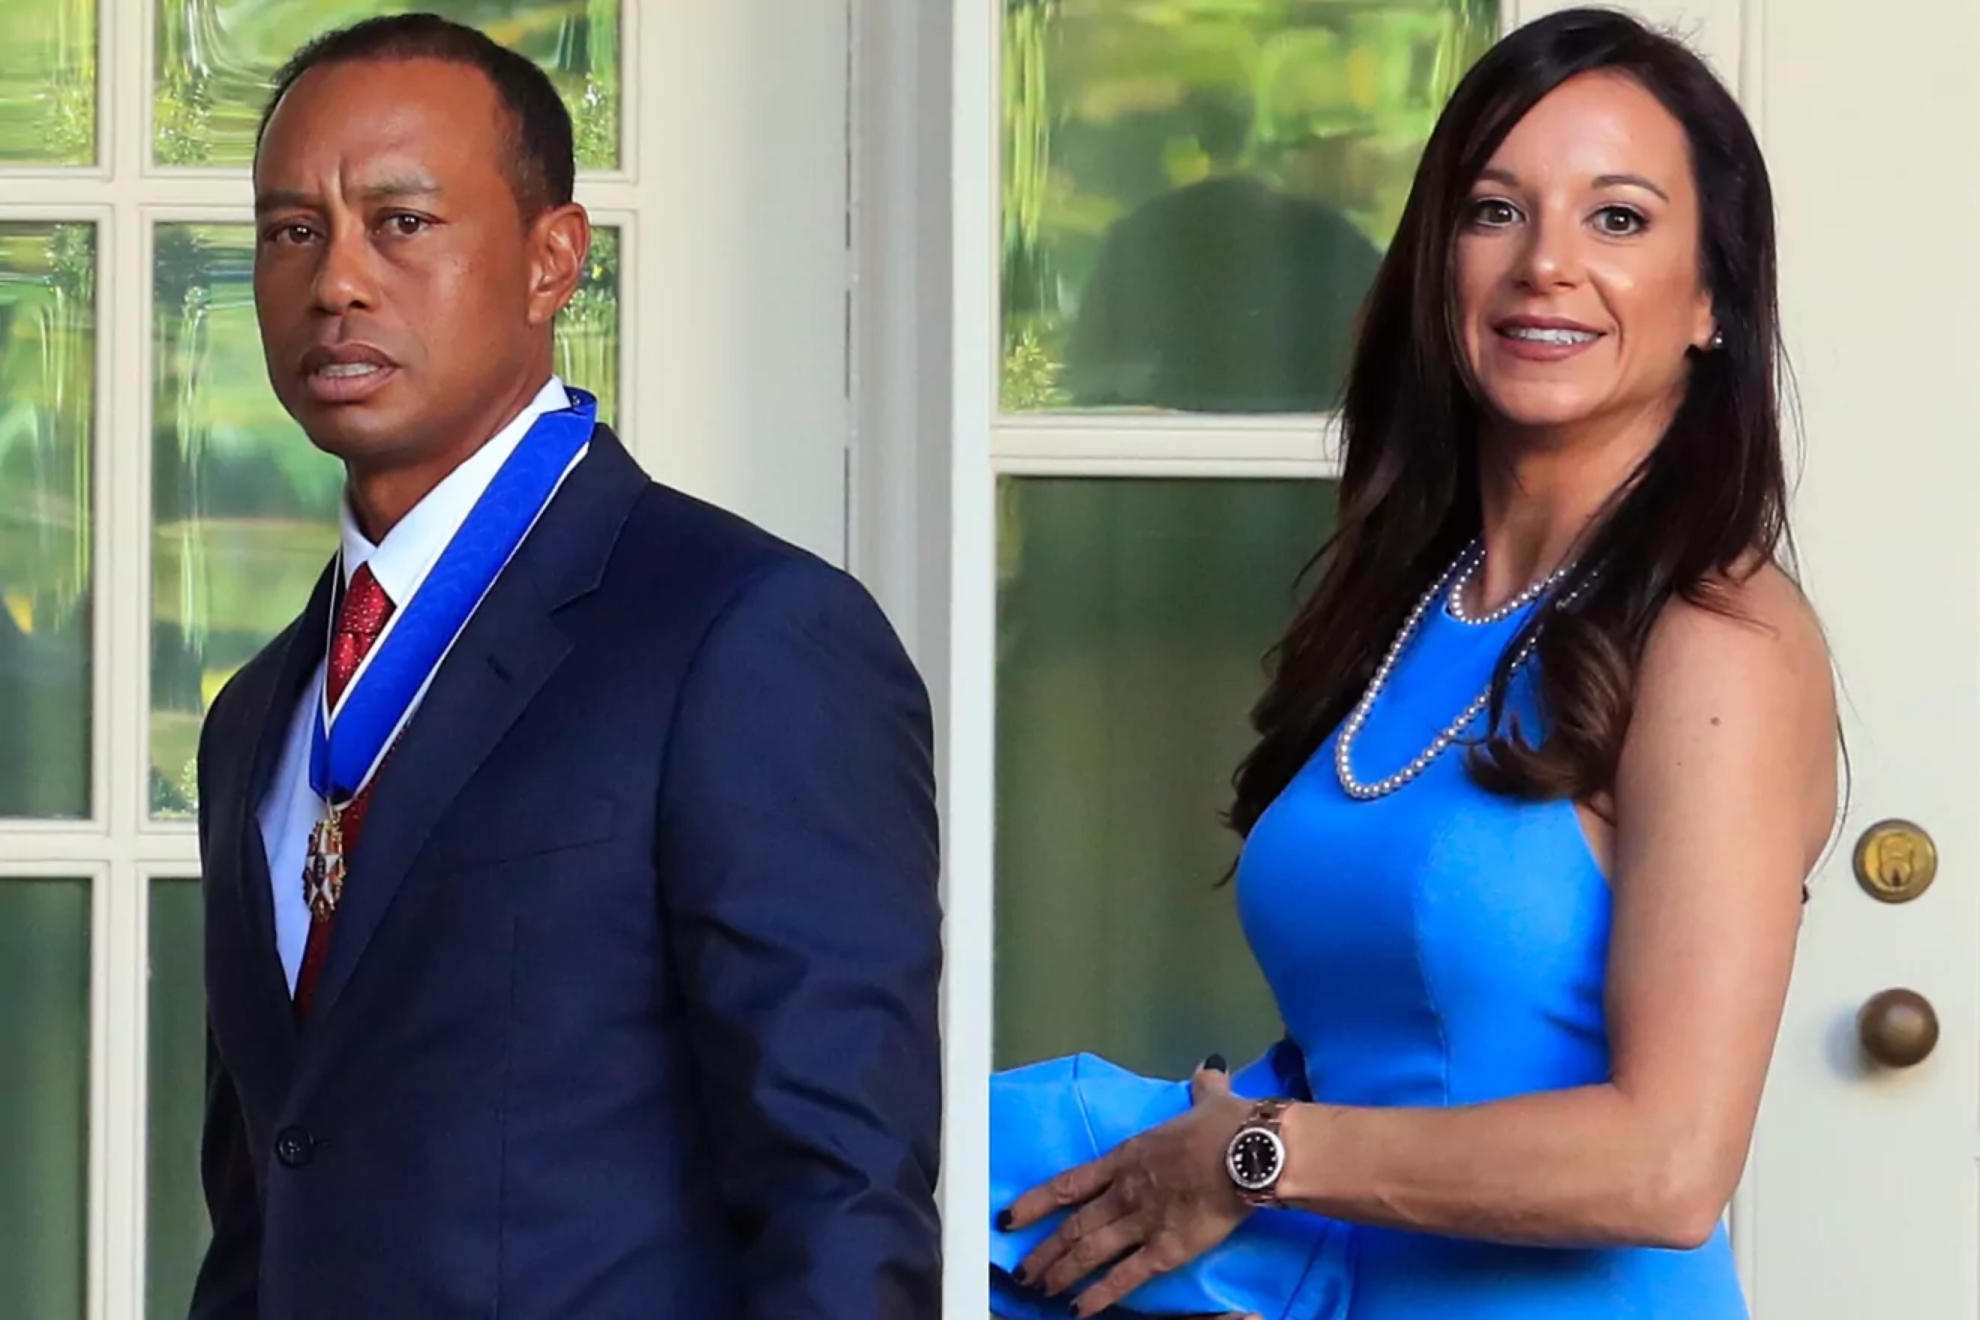 Image of Erica Herman and Tiger Woods